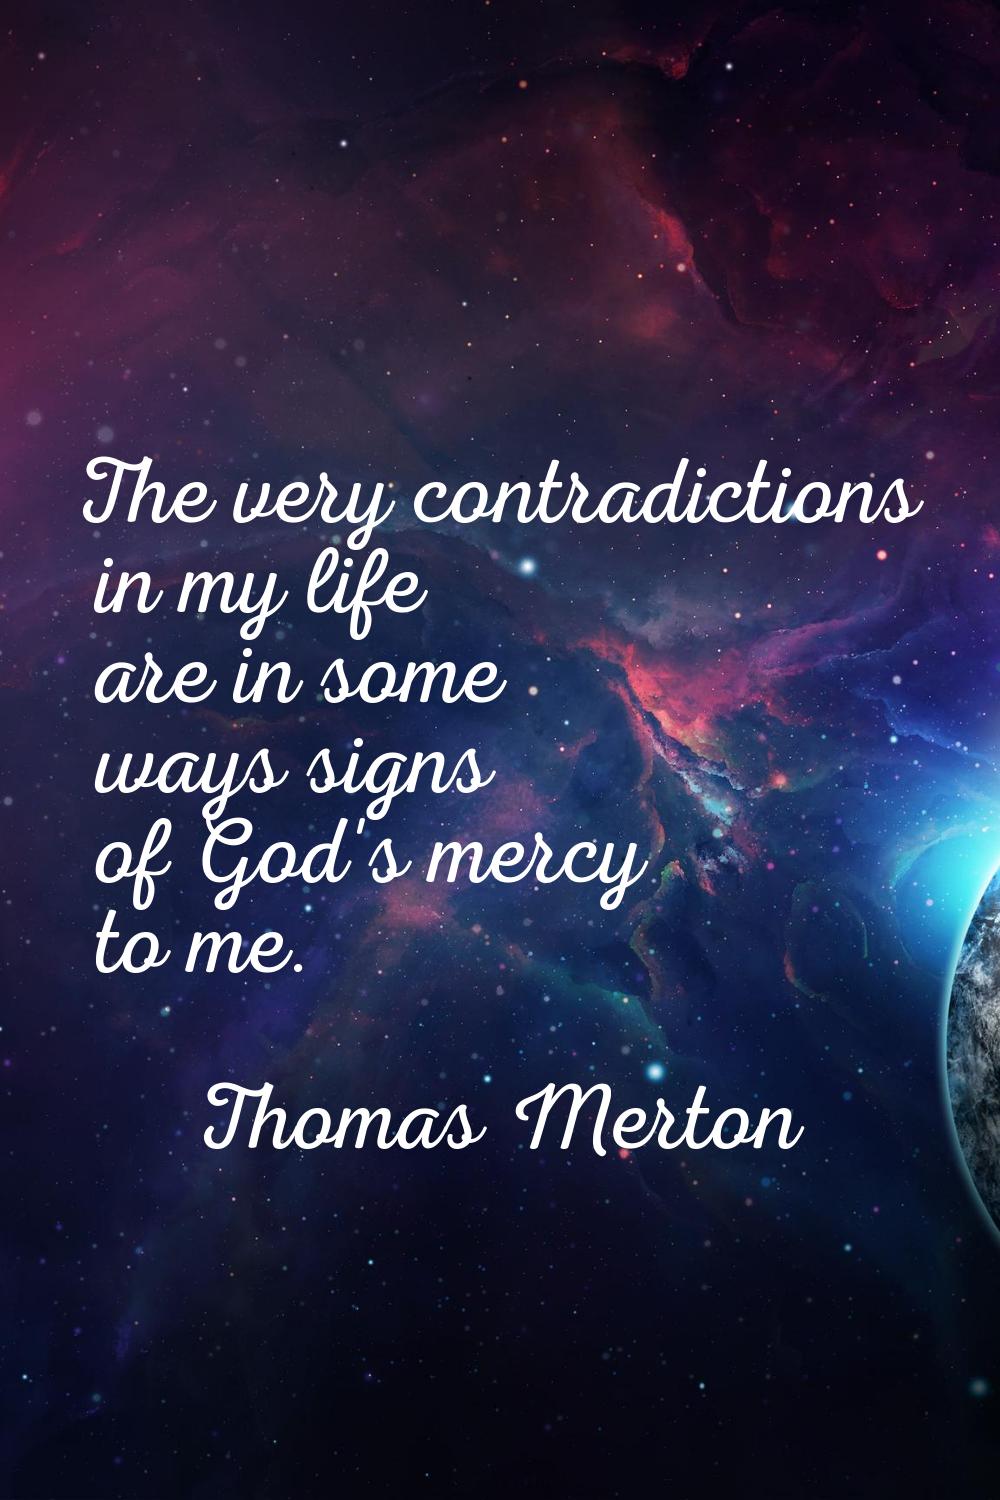 The very contradictions in my life are in some ways signs of God's mercy to me.